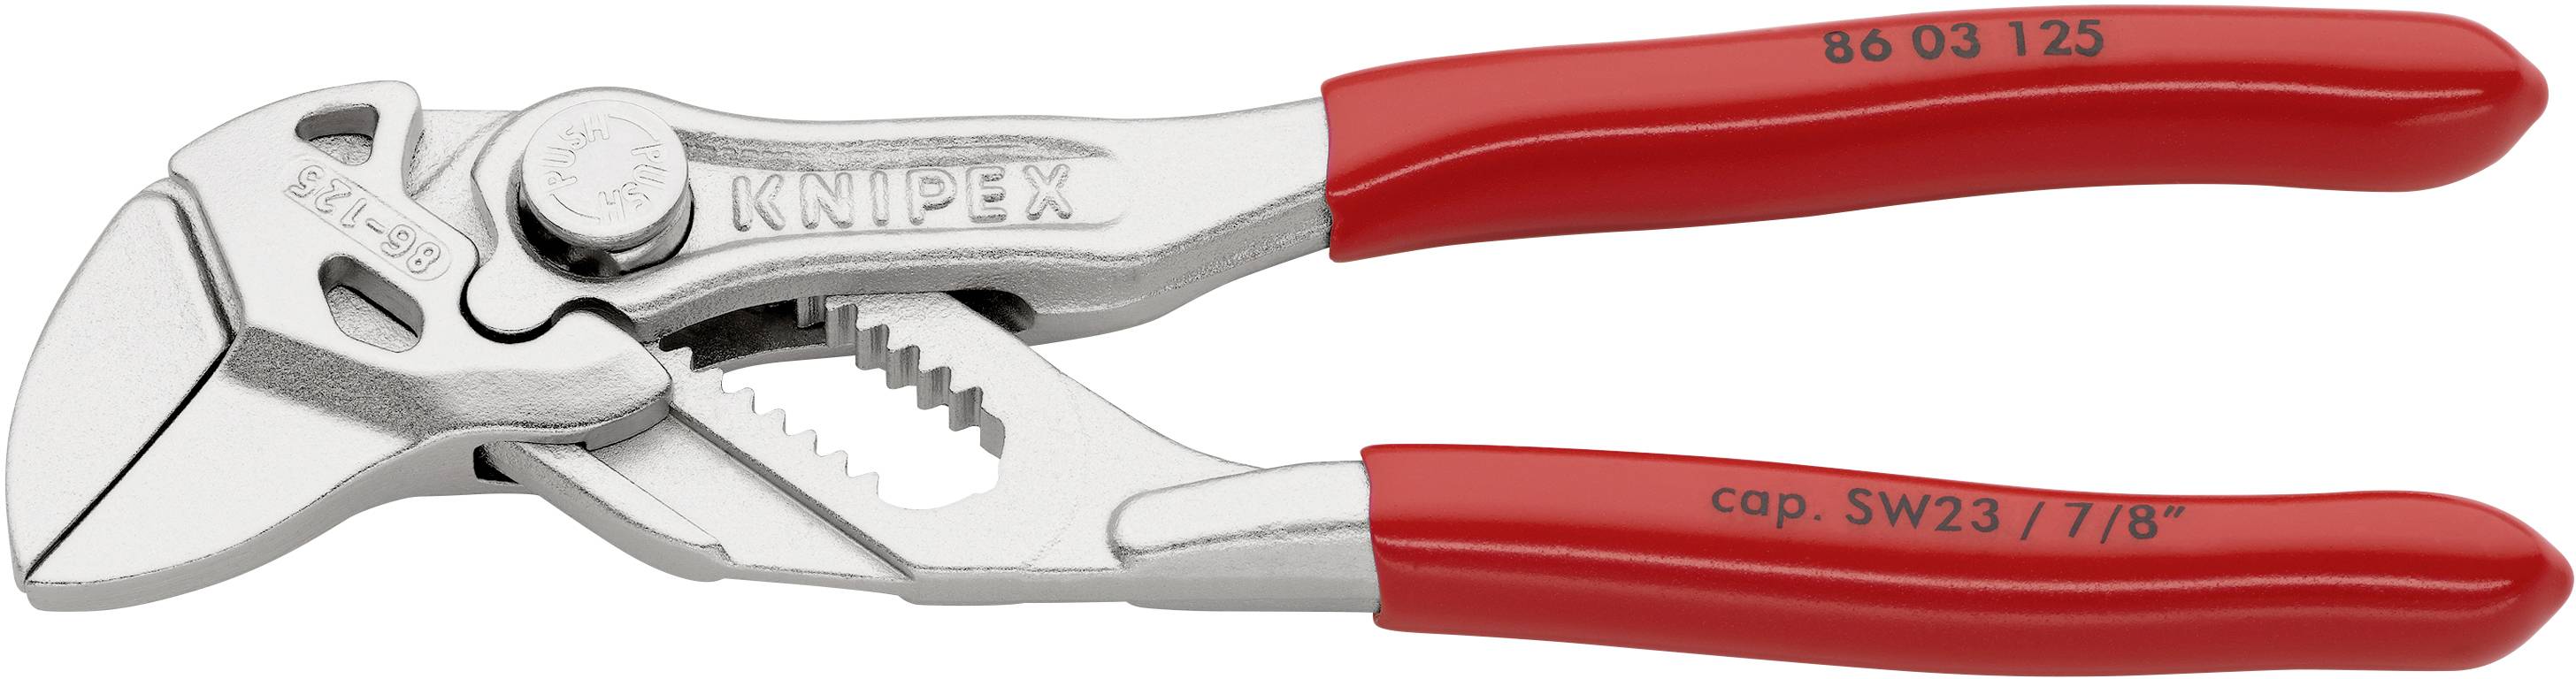 KNIPEX Pinza chiave ganasce parallele Knipex Alligator 86-03 